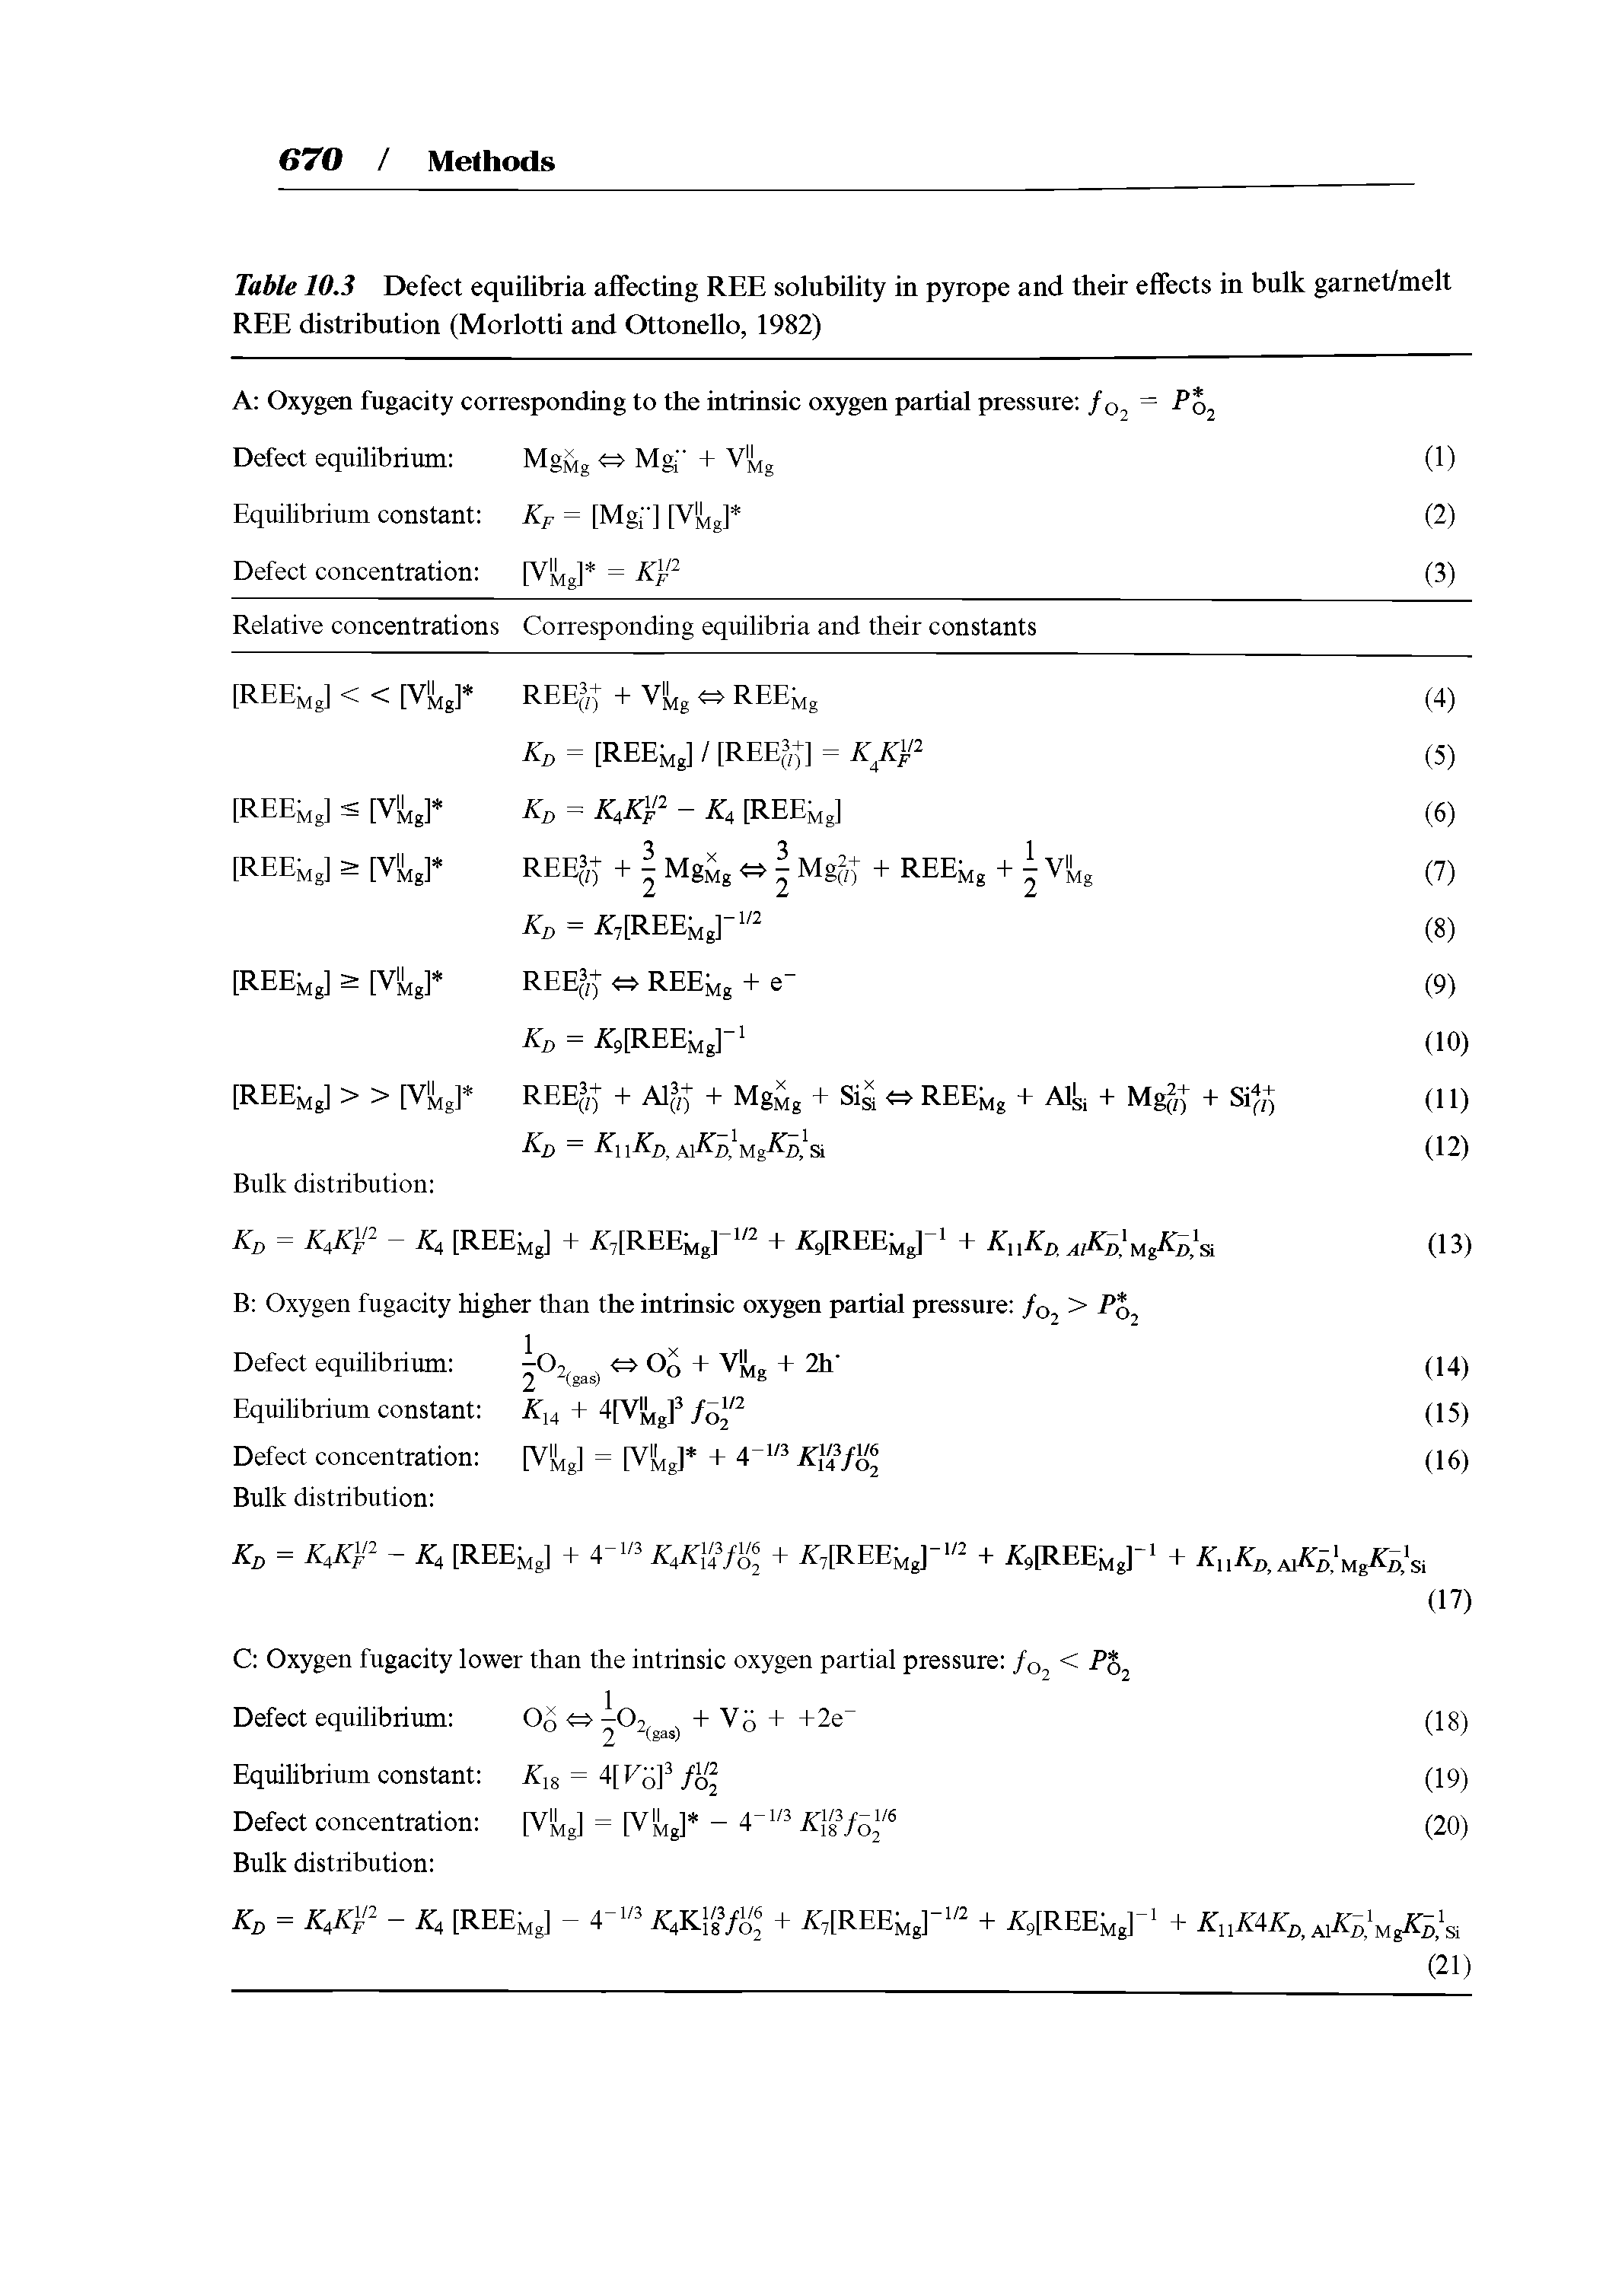 Table 10.3 Defect equilibria affecting REE solubility in pyrope and their effects in bulk garnet/melt REE distribution (Morlotti and Ottonello, 1982)...